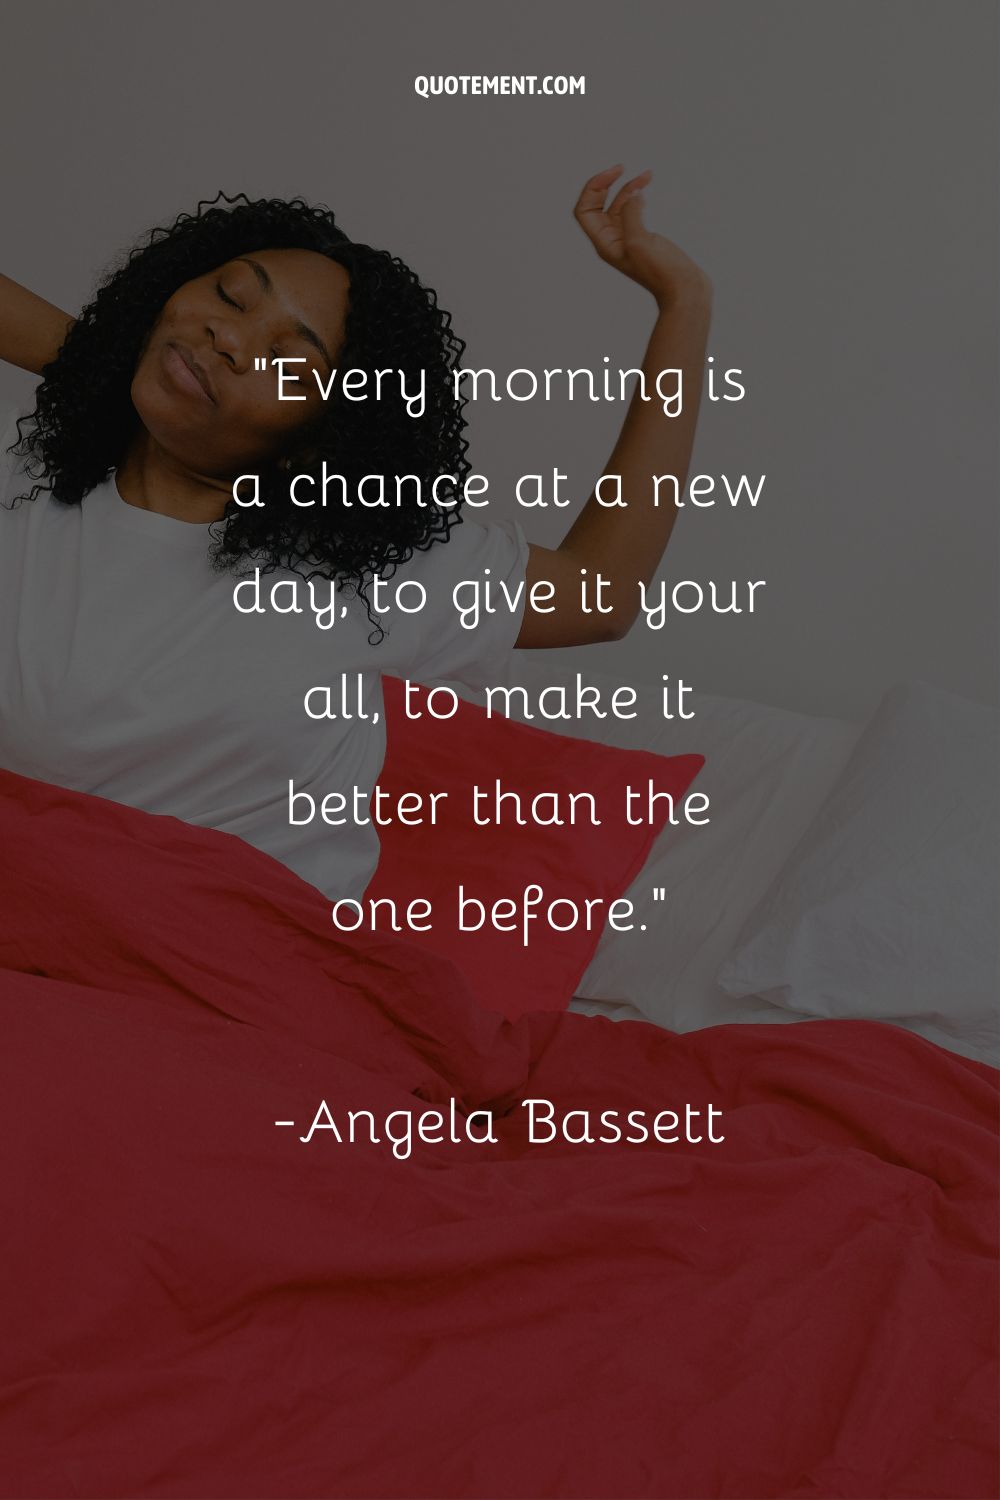 Every morning is a chance at a new day, to give it your all, to make it better than the one before